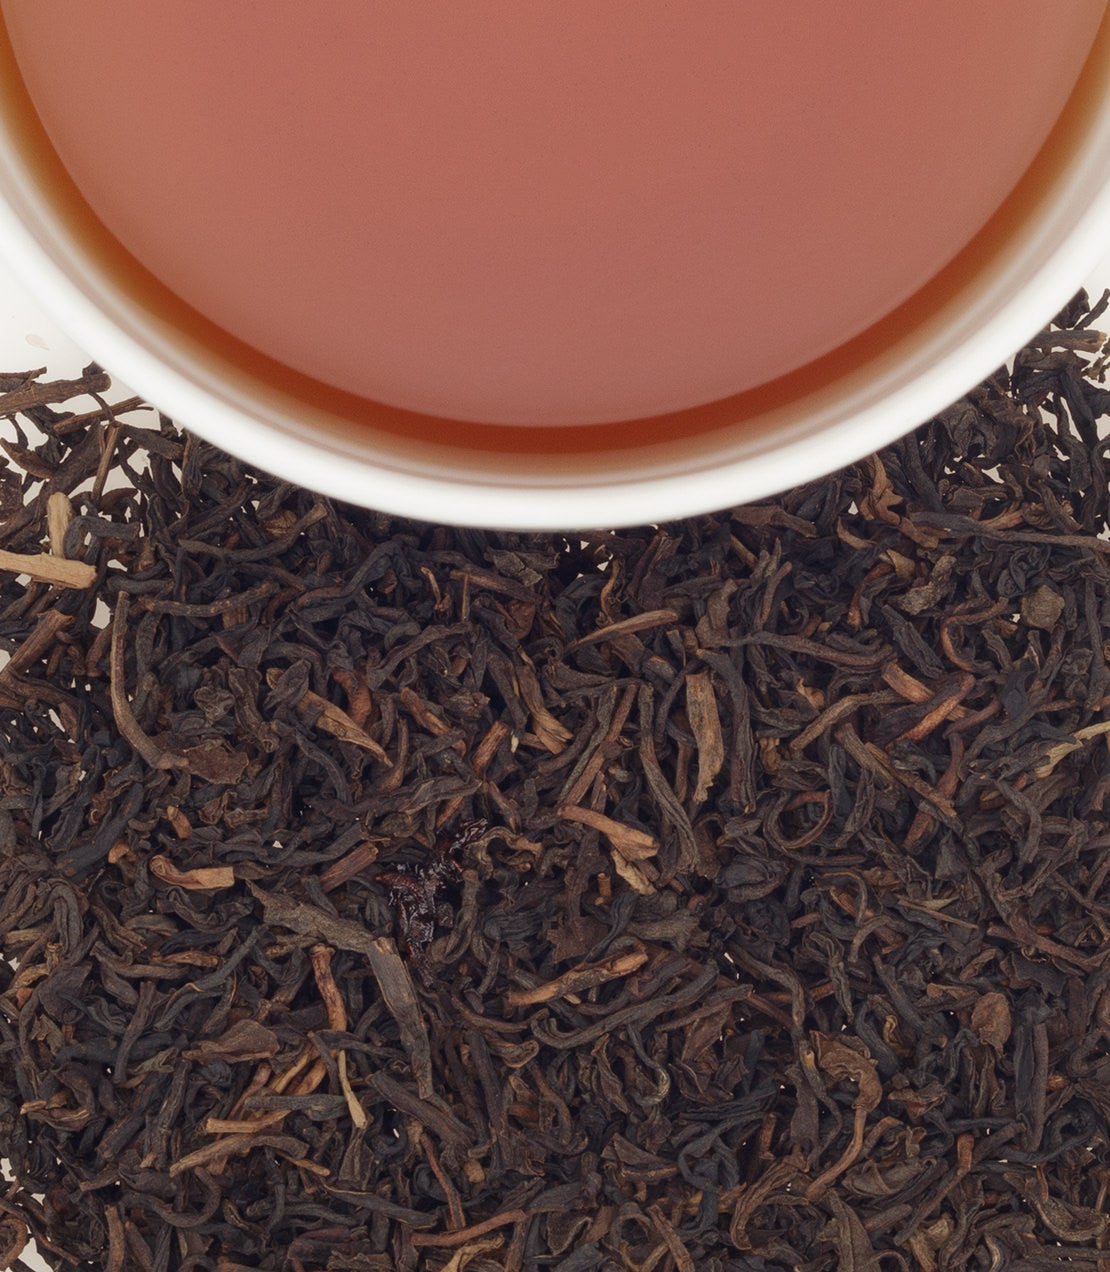 Decaf Apricot -   - Harney & Sons Fine Teas